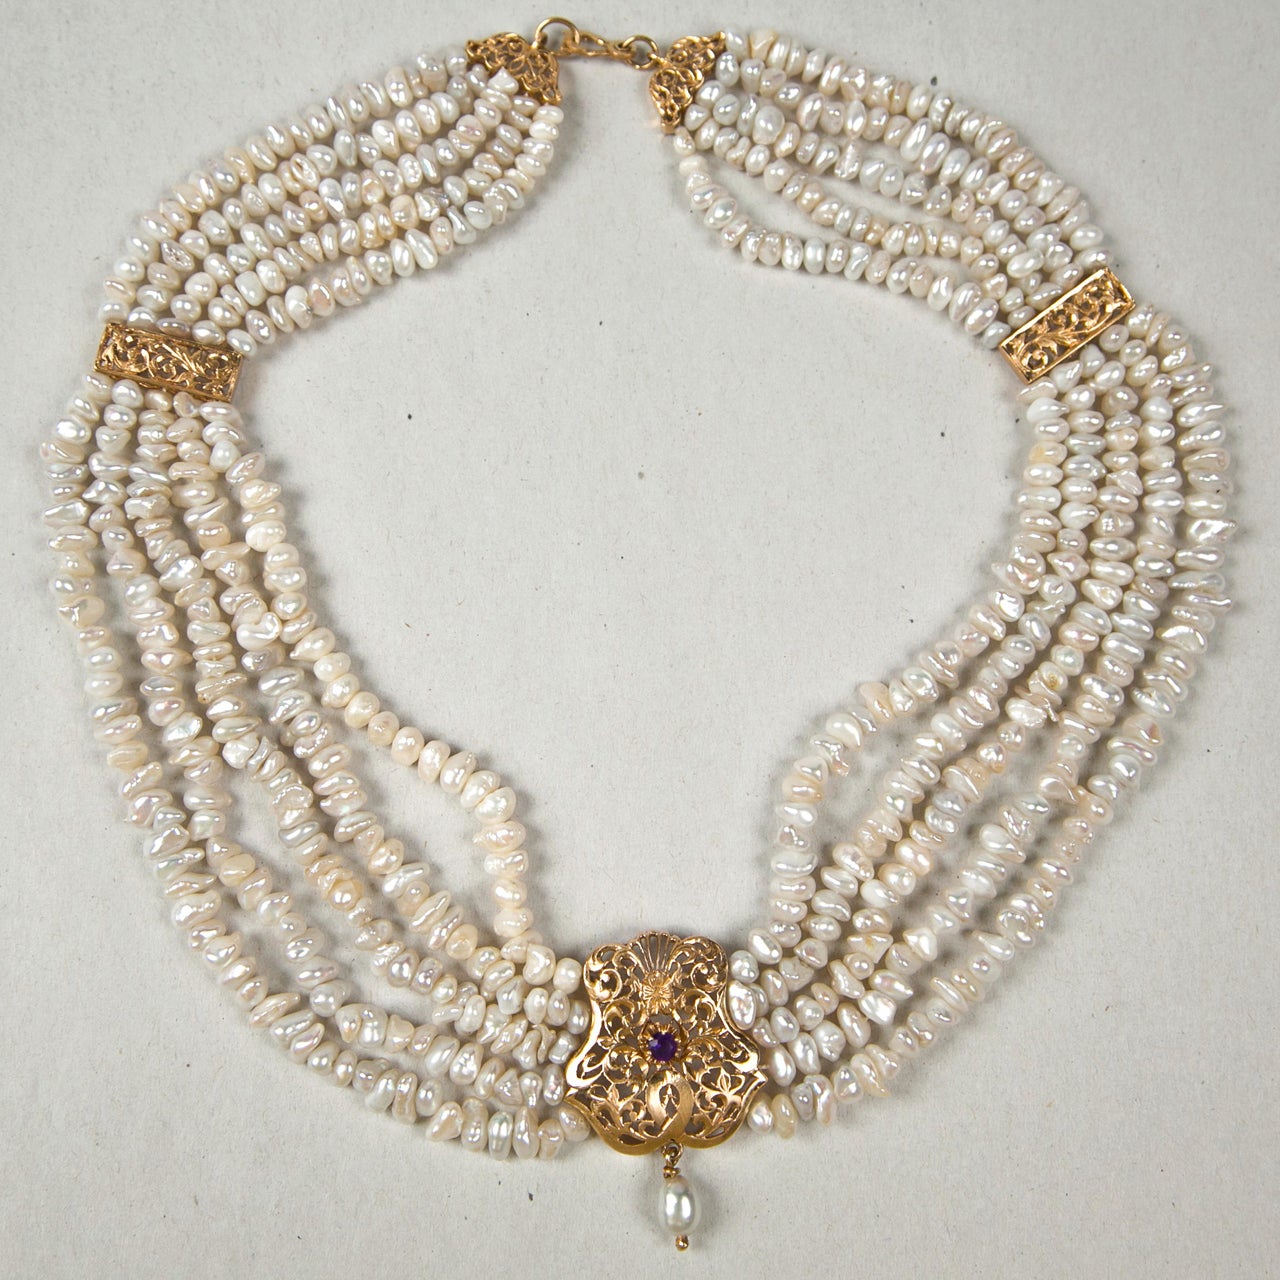 Five Strand Baroque Pearl Festoon Necklace with draping swags of natural baroque pearls and solid 18K gold stations. Unmarked, gold content is tested. Victorian 1840-1860 possibly older